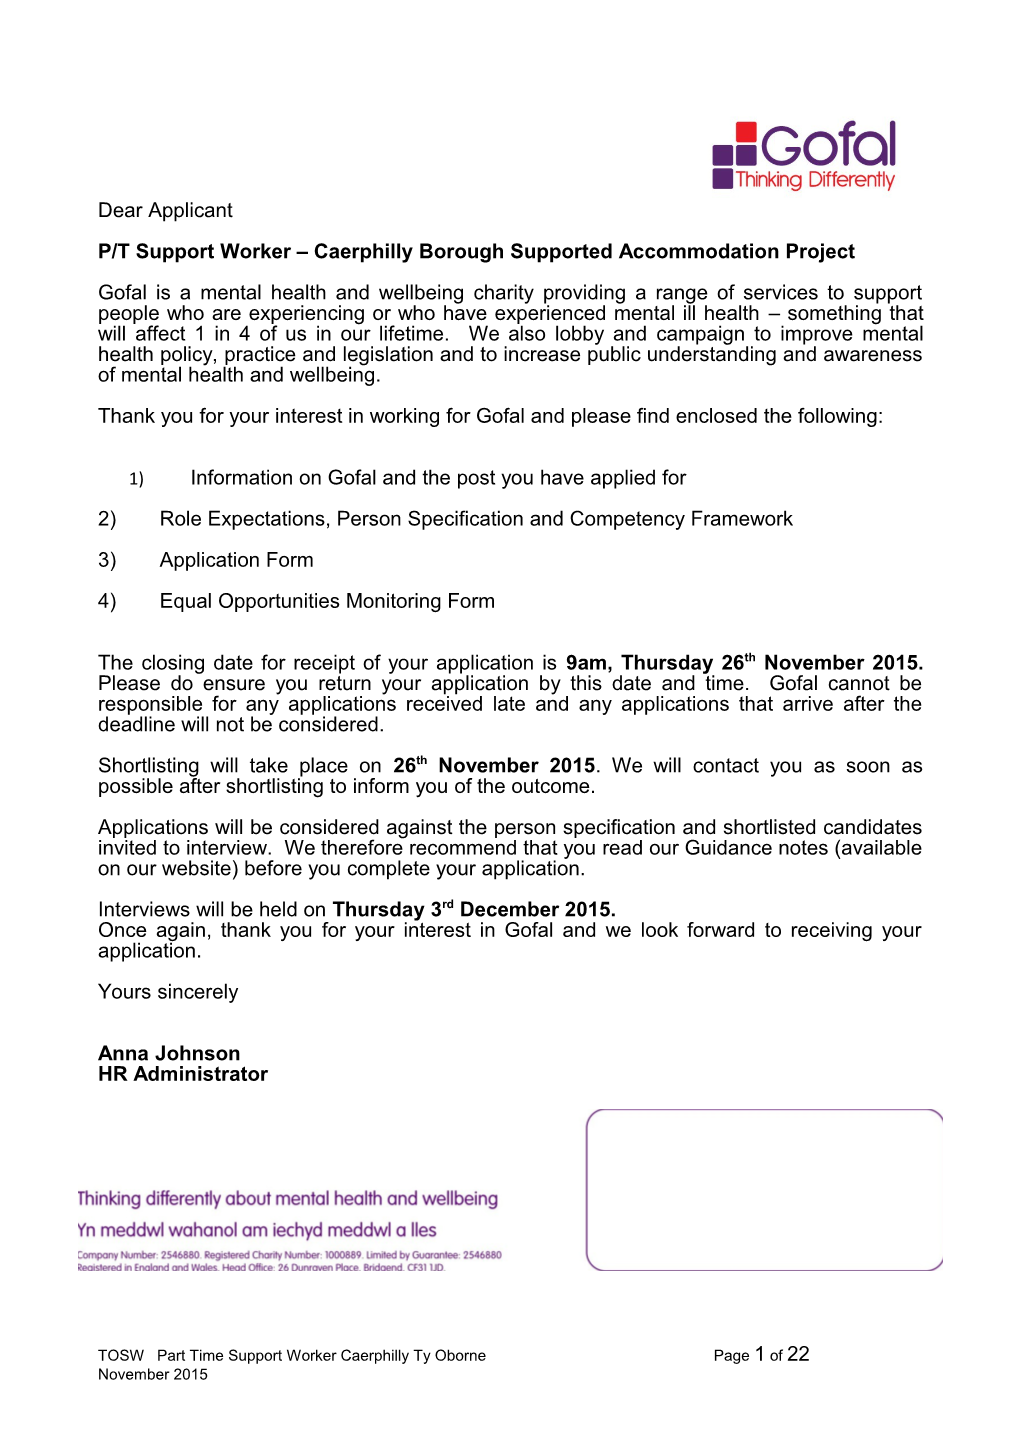 P/T Support Worker Caerphilly Borough Supported Accommodation Project